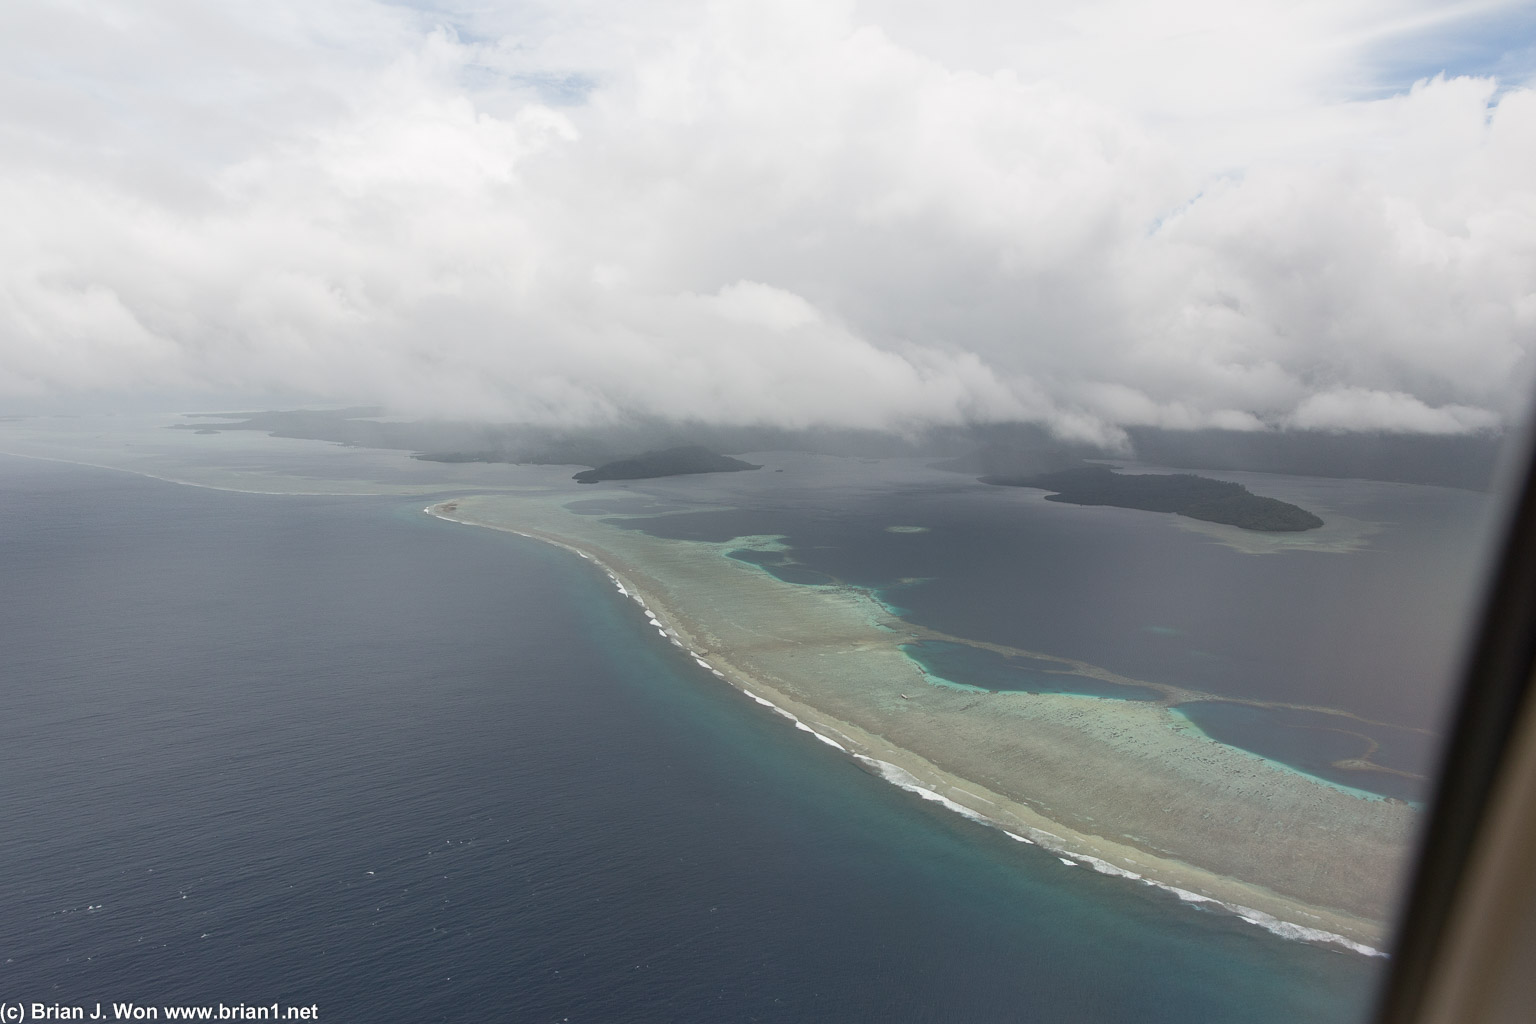 Approaching Pohnpei. Volcanic atoll this time.